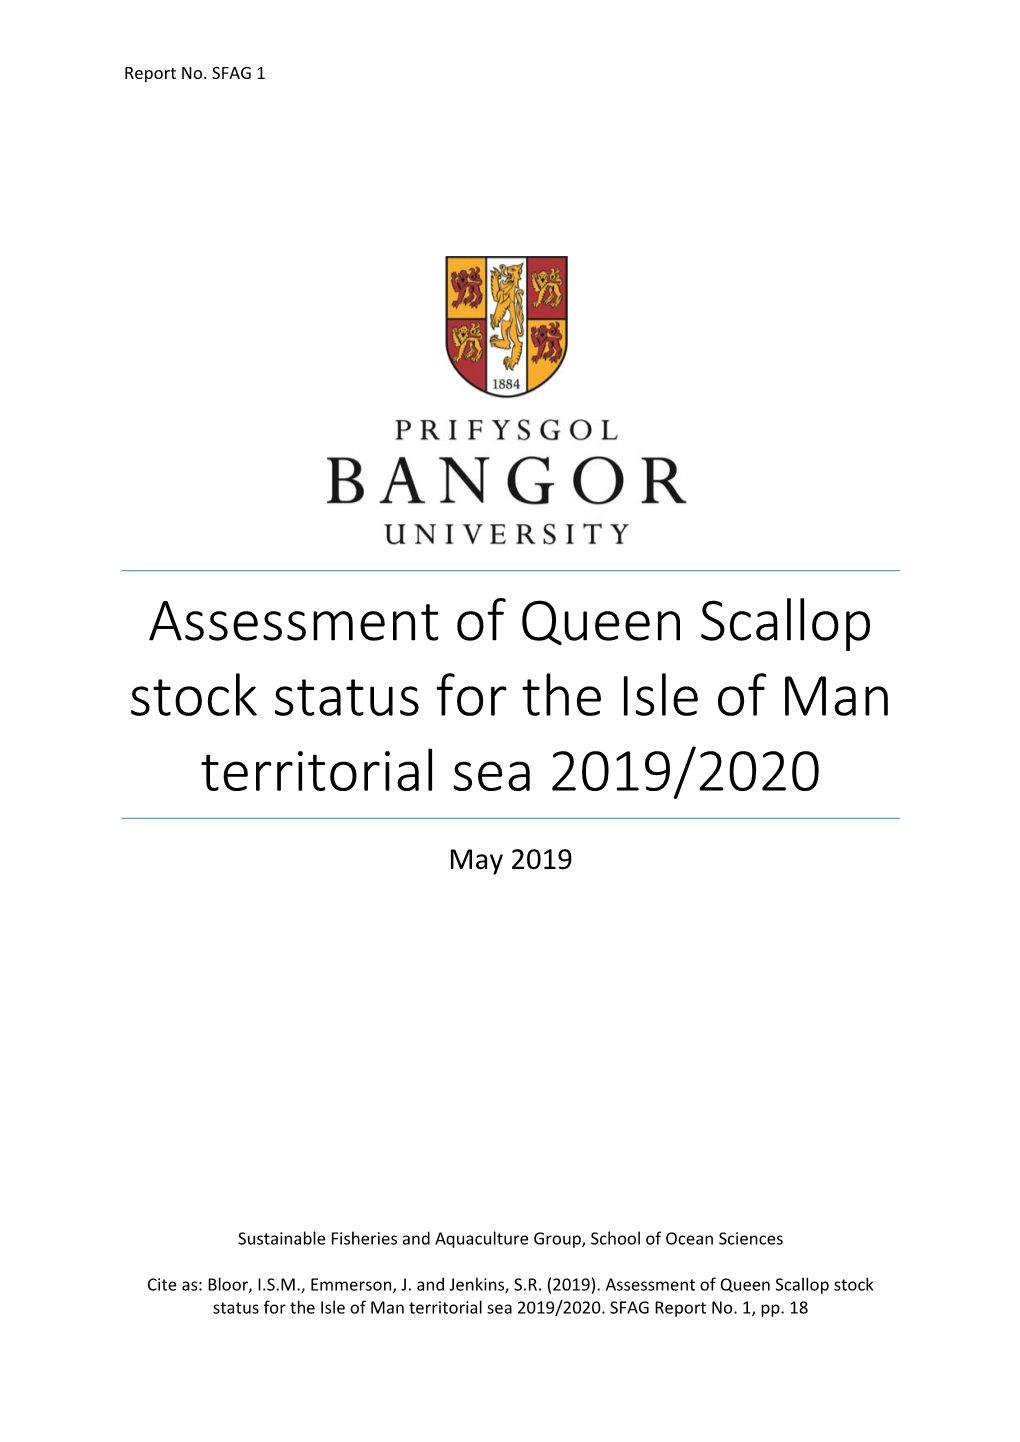 Assessment of Queen Scallop Stock Status for the Isle of Man Territorial Sea 2019/2020